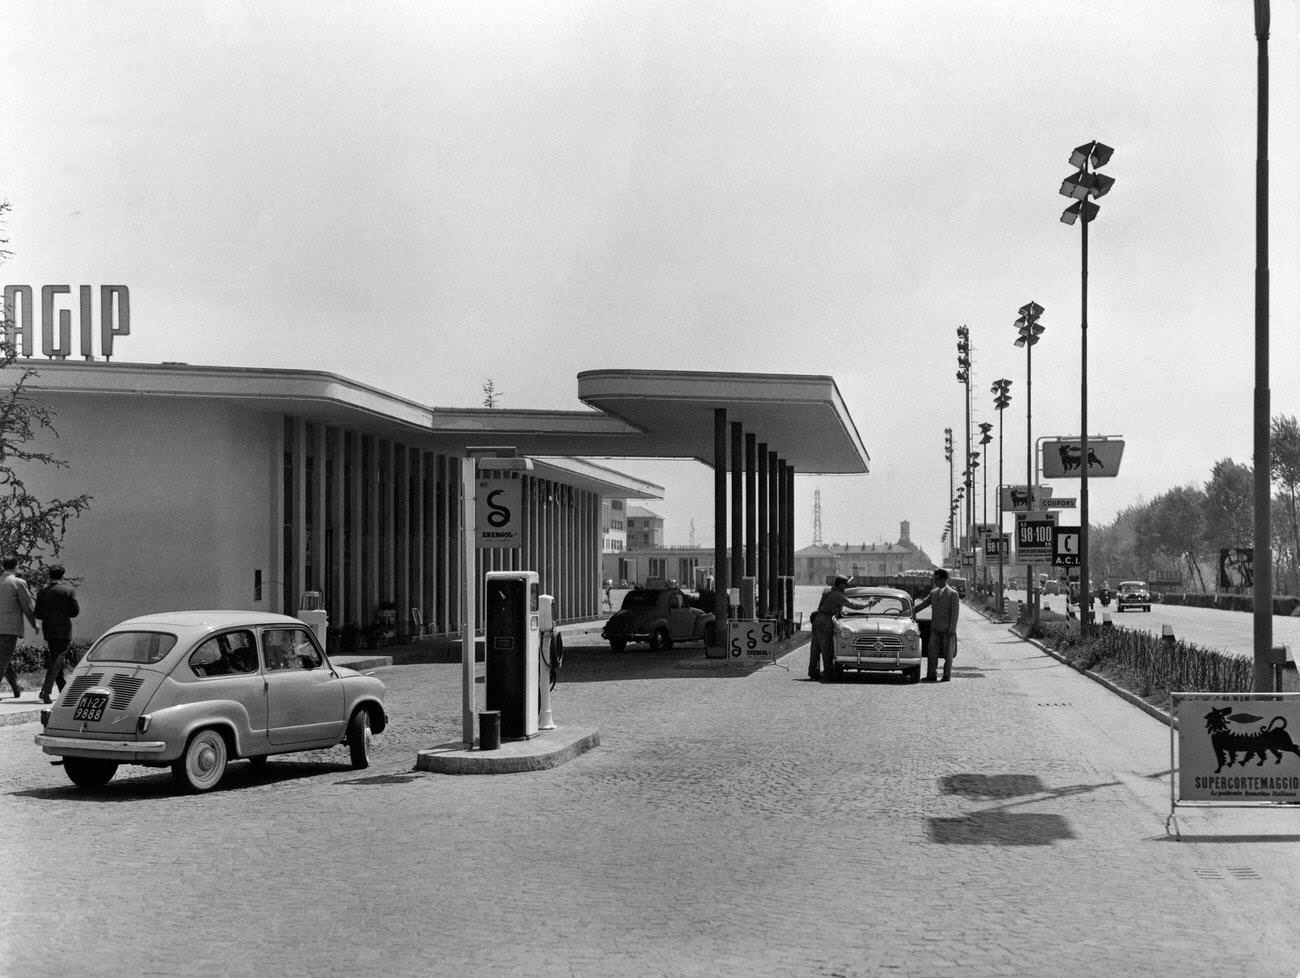 Agip petrol station with pumps and bar in San Donato Milanese, 1950s.